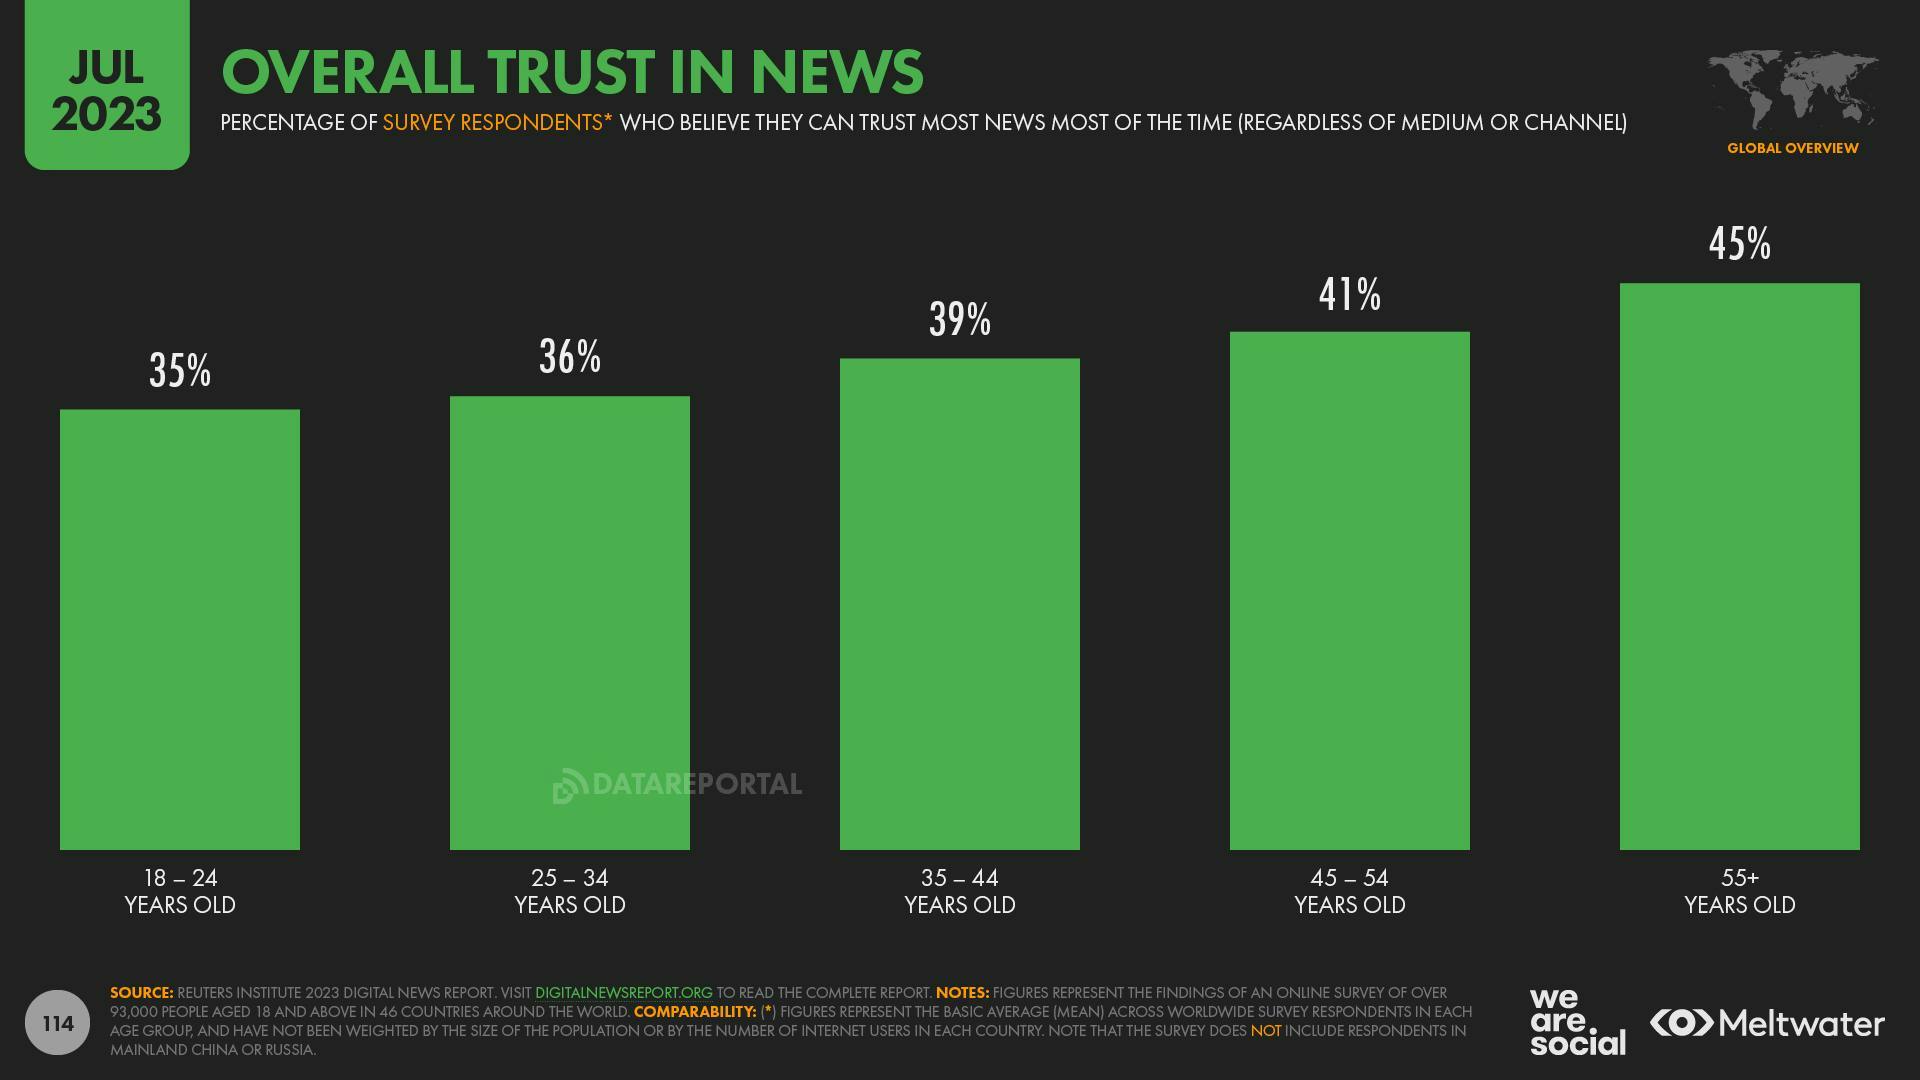 A bar chart showing overall trust in news across age groups, with the highest percentage, 45%, belonging to the 55+ age range, according to RISJ survey data.